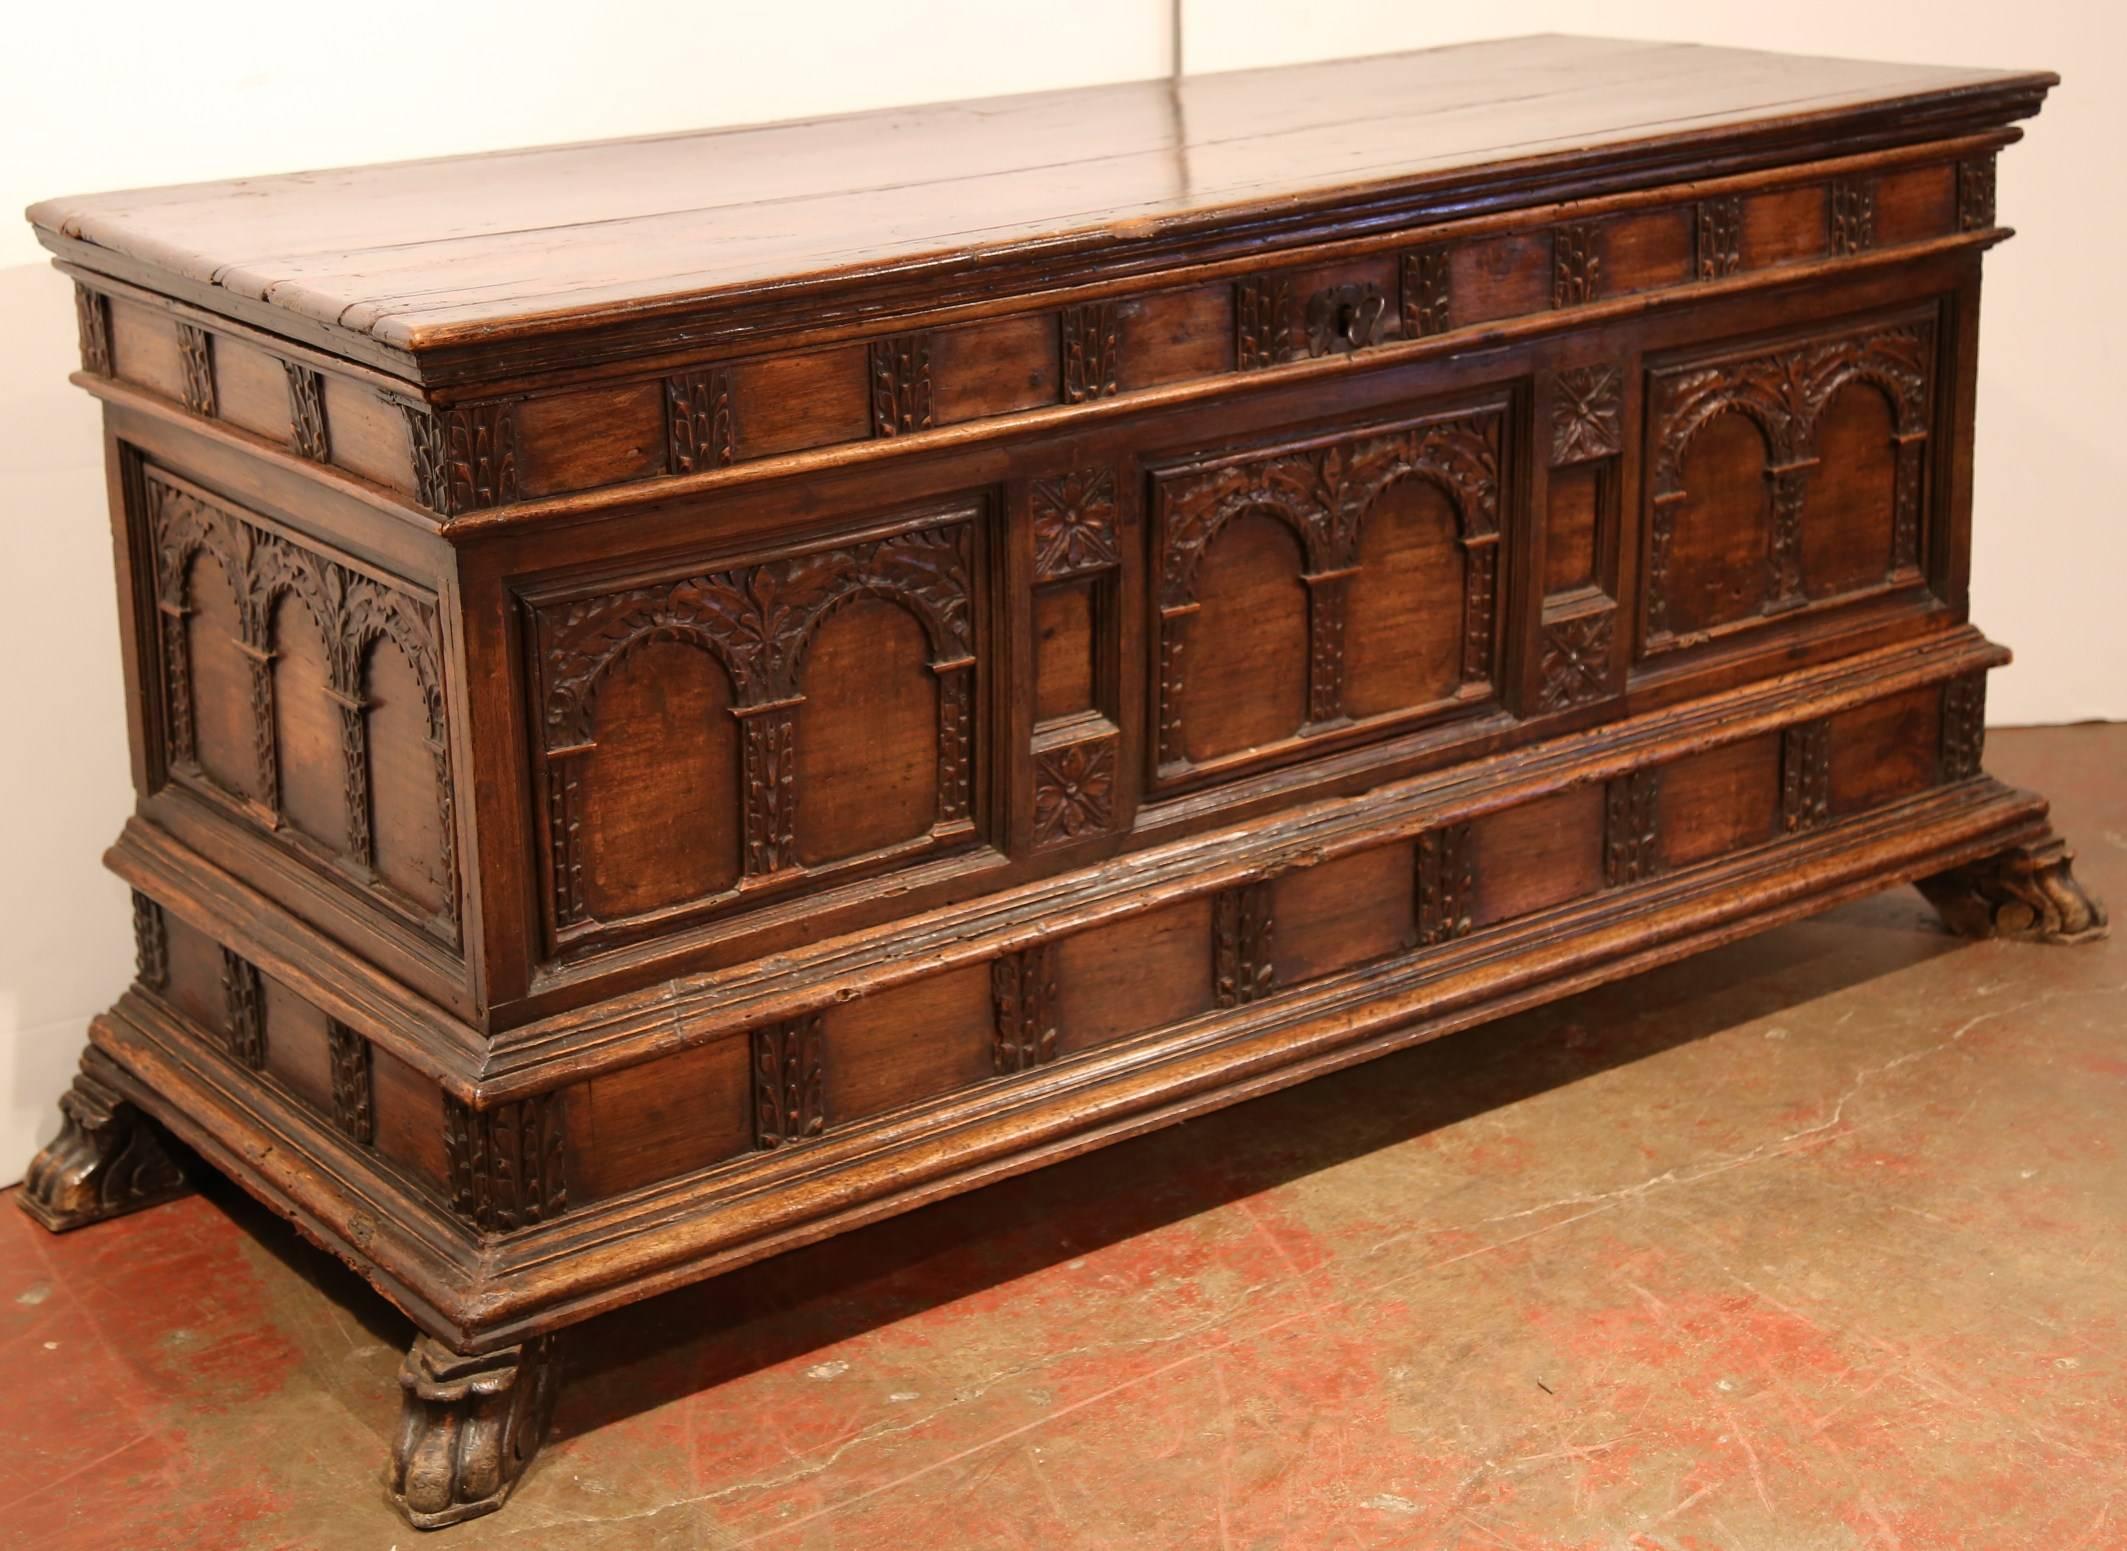 Antique carved walnut cassone coffer on paw feet from Italy, circa 1680, featuring beautiful carved panels on the front with paw feet at the base. Opened or closed because of the inside carved panel, this trunk can be used as a storage unit or as a